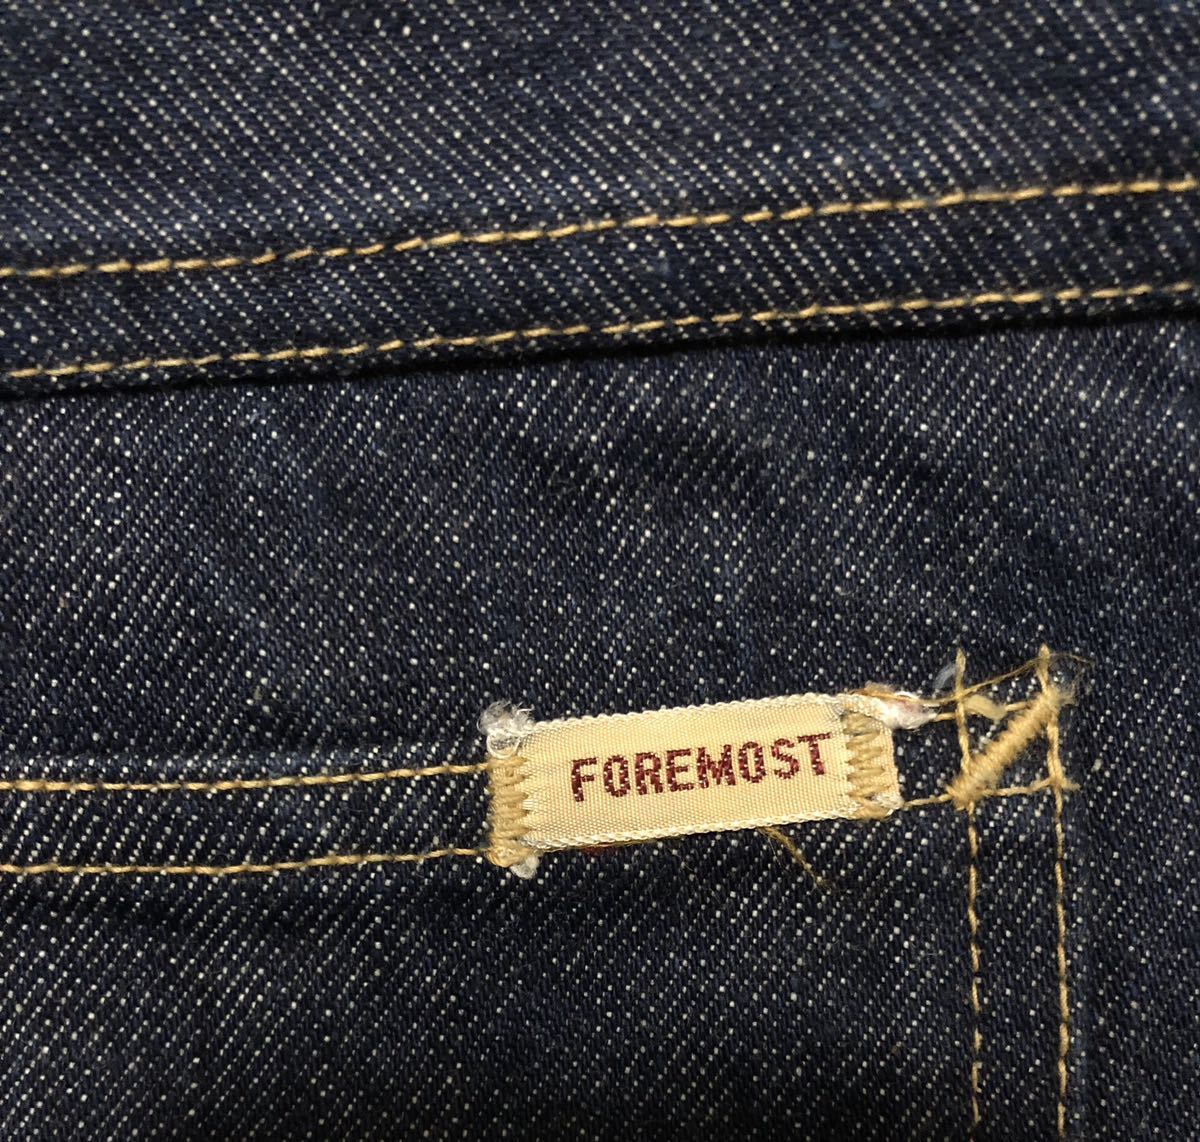 50's 濃紺PENNY'S FOREMOST 5POCKET JEANS W32/片耳！ペニーズ1WASH？の画像5